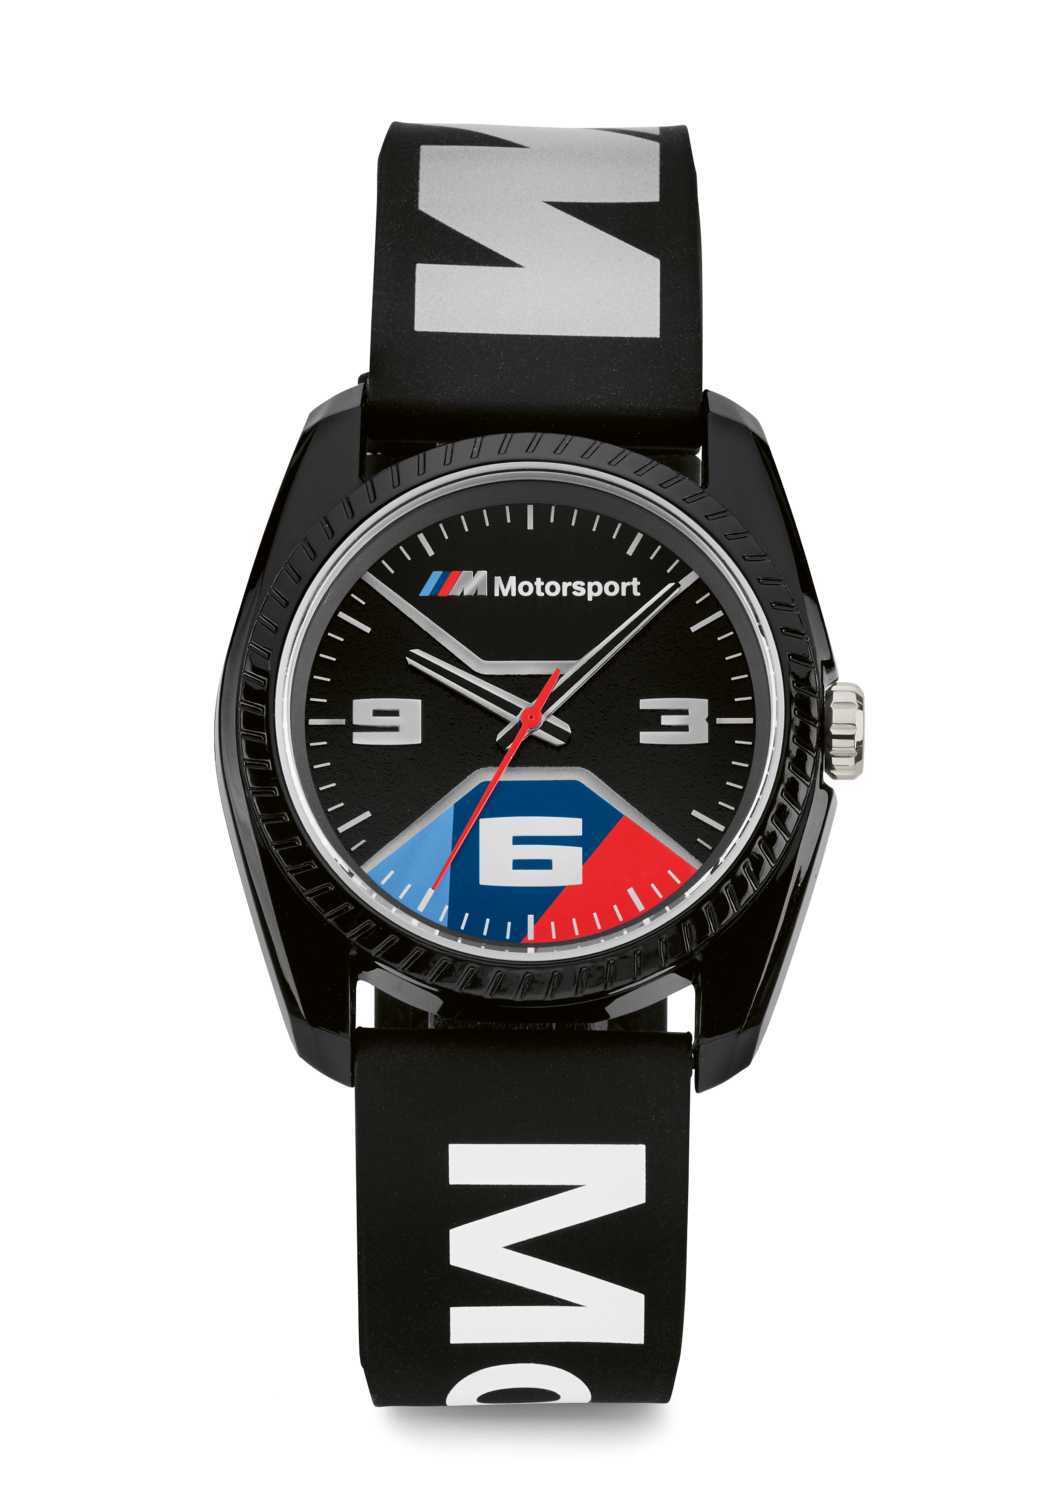 Launch of the 2020 BMW Lifestyle collections - BMW M Motorsport Watch  (05/2020).